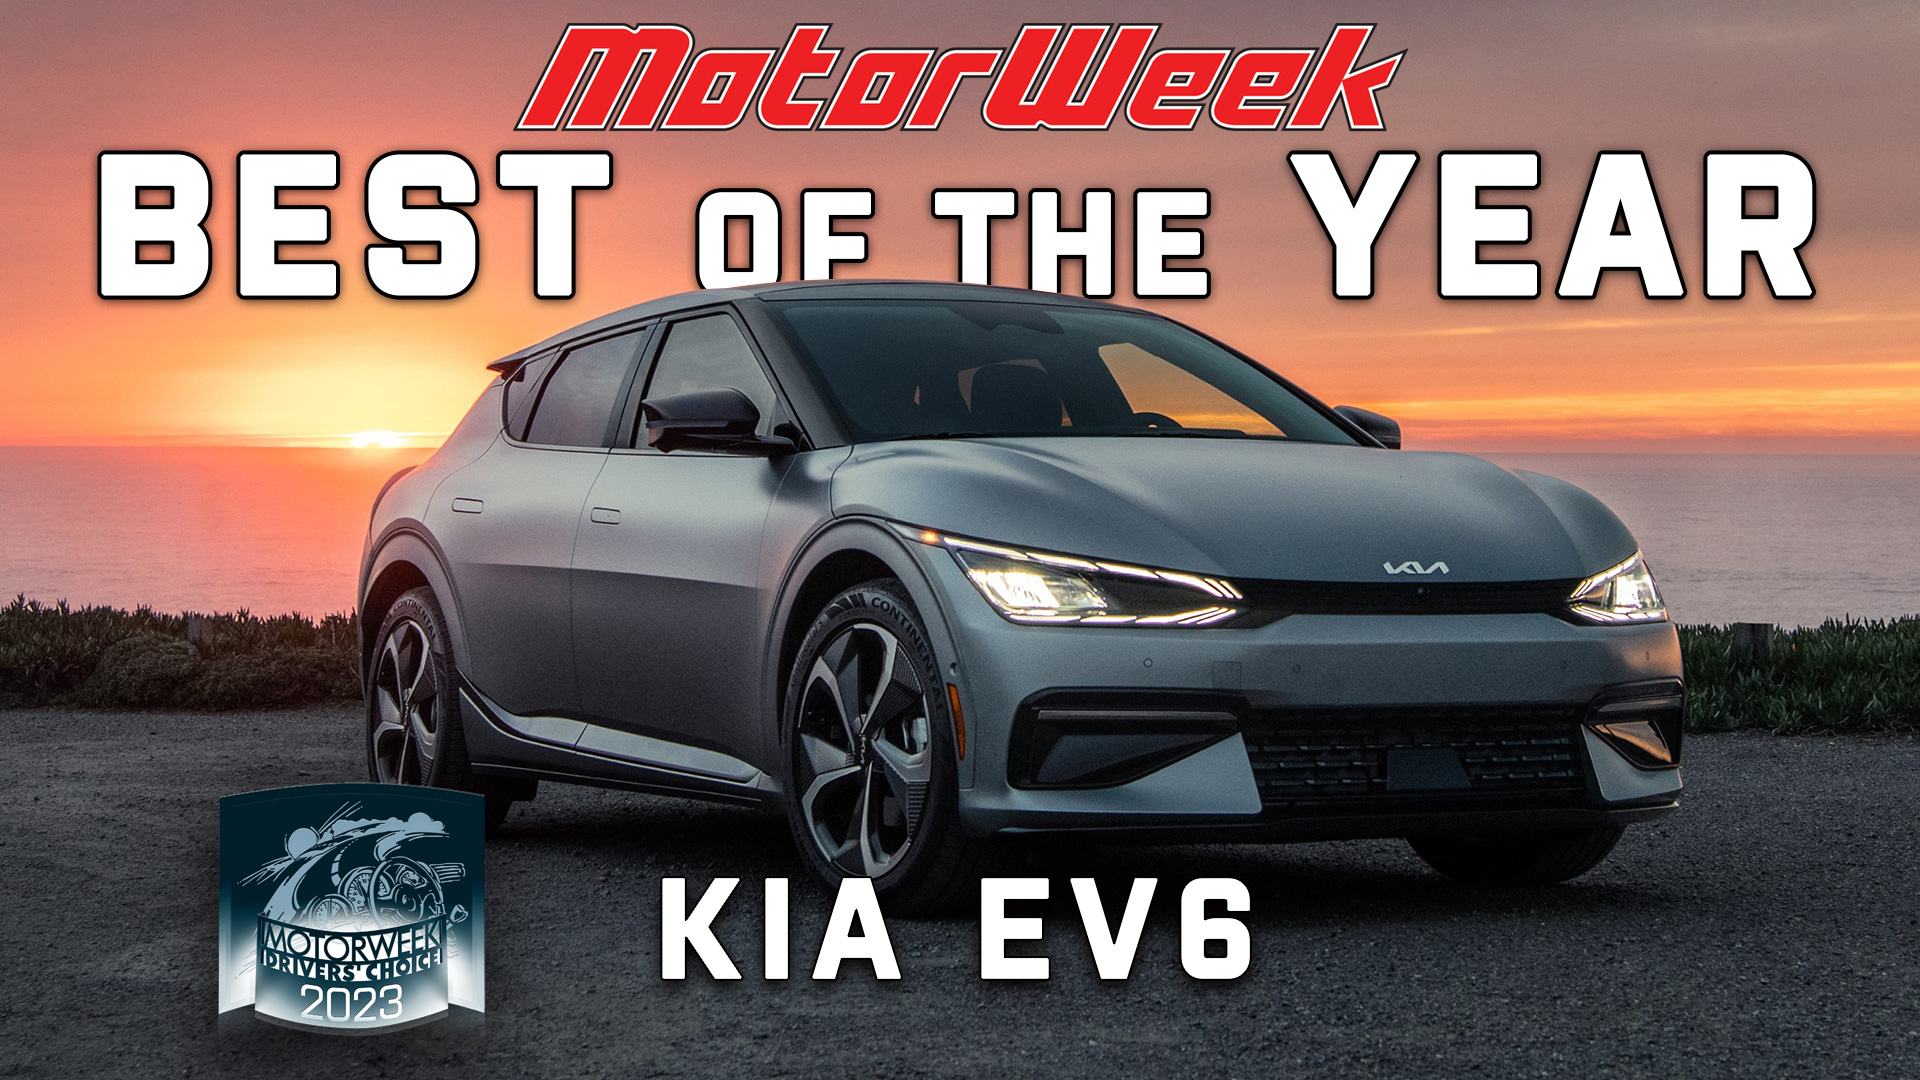 MotorWeek’s 2023 Drivers’ Choice Awards Best of the Year